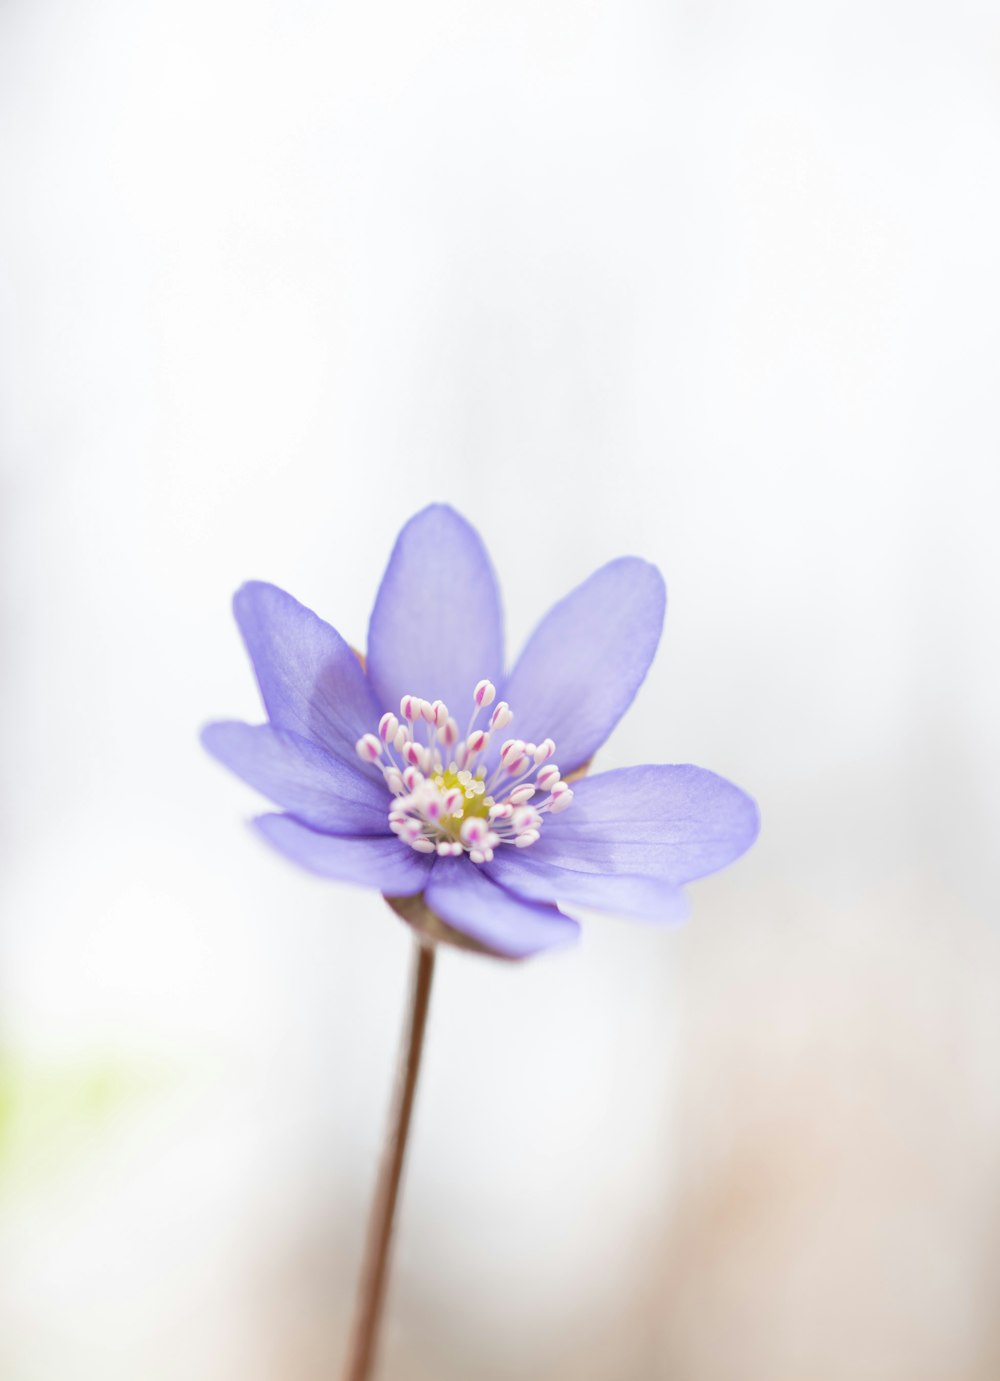 a small purple flower with a white center